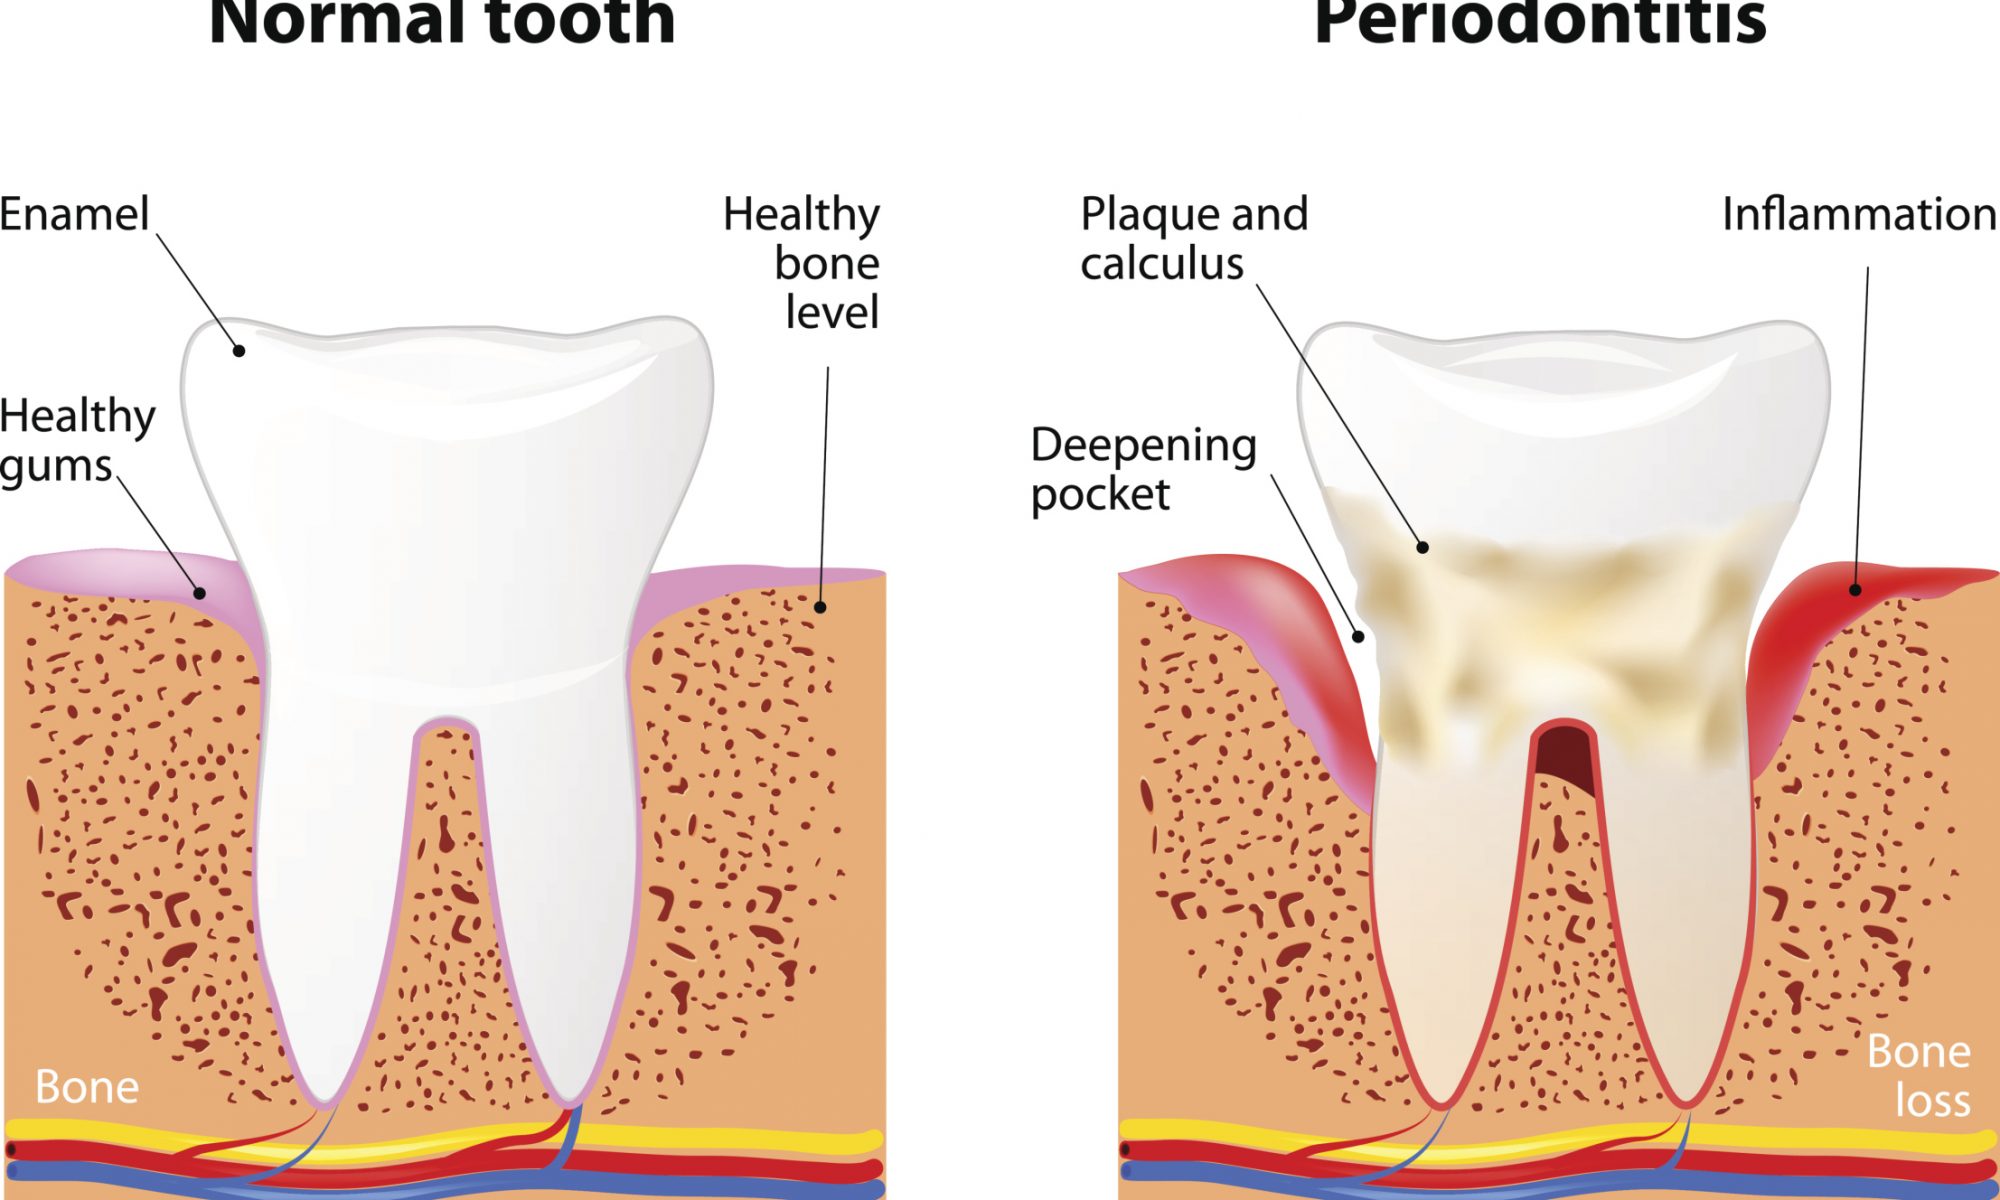 A detailed image depicting a normal tooth against a tooth infected with periodontitis